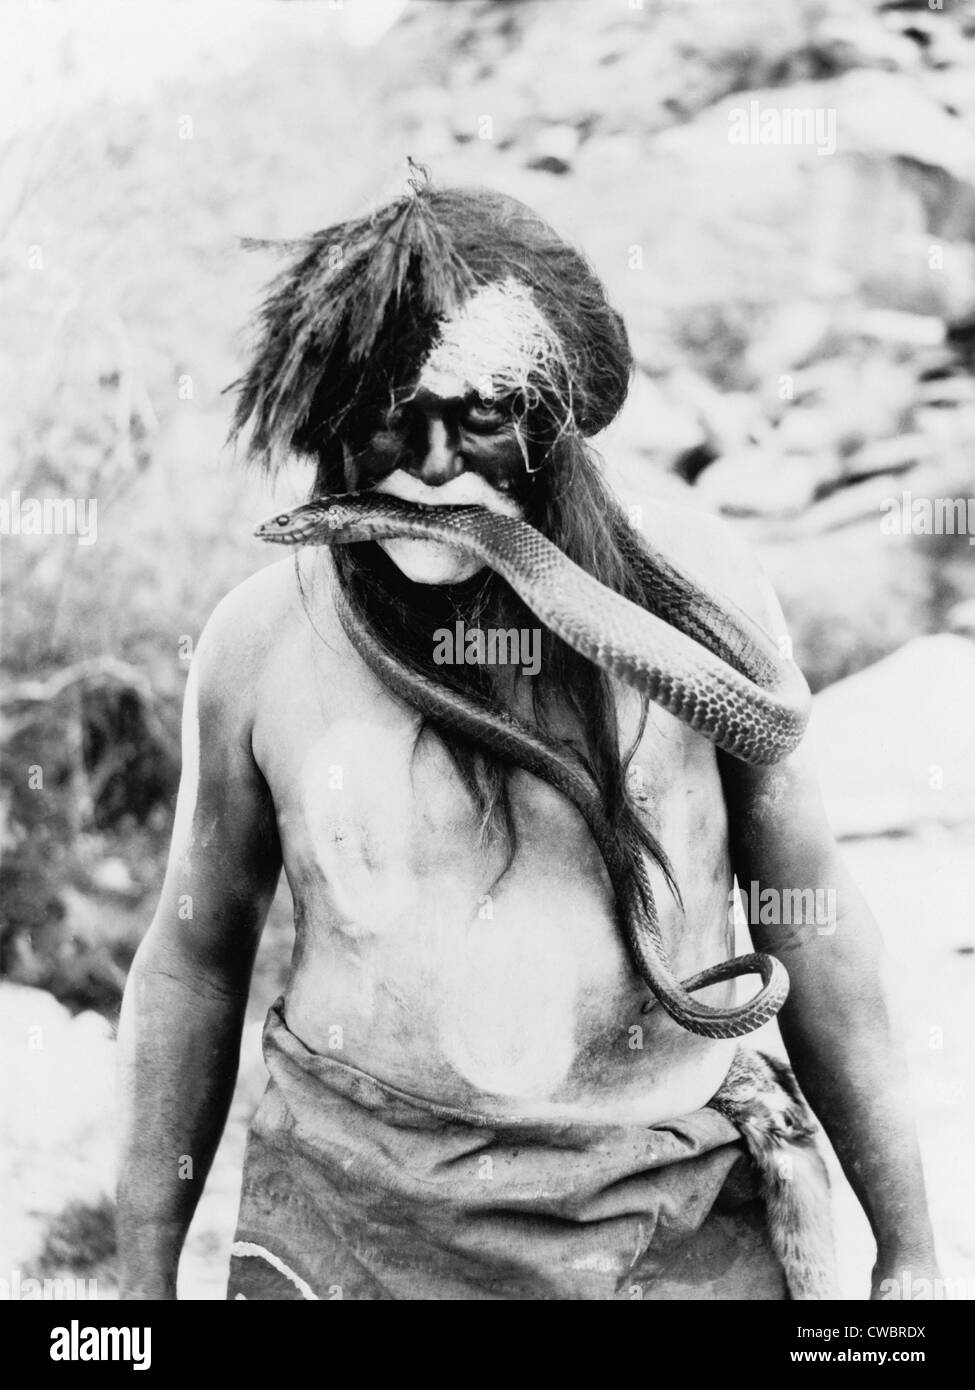 Hopi Indian with painted face and body and snake in mouth. Photo by Ralph Murphy, 1924. Stock Photo